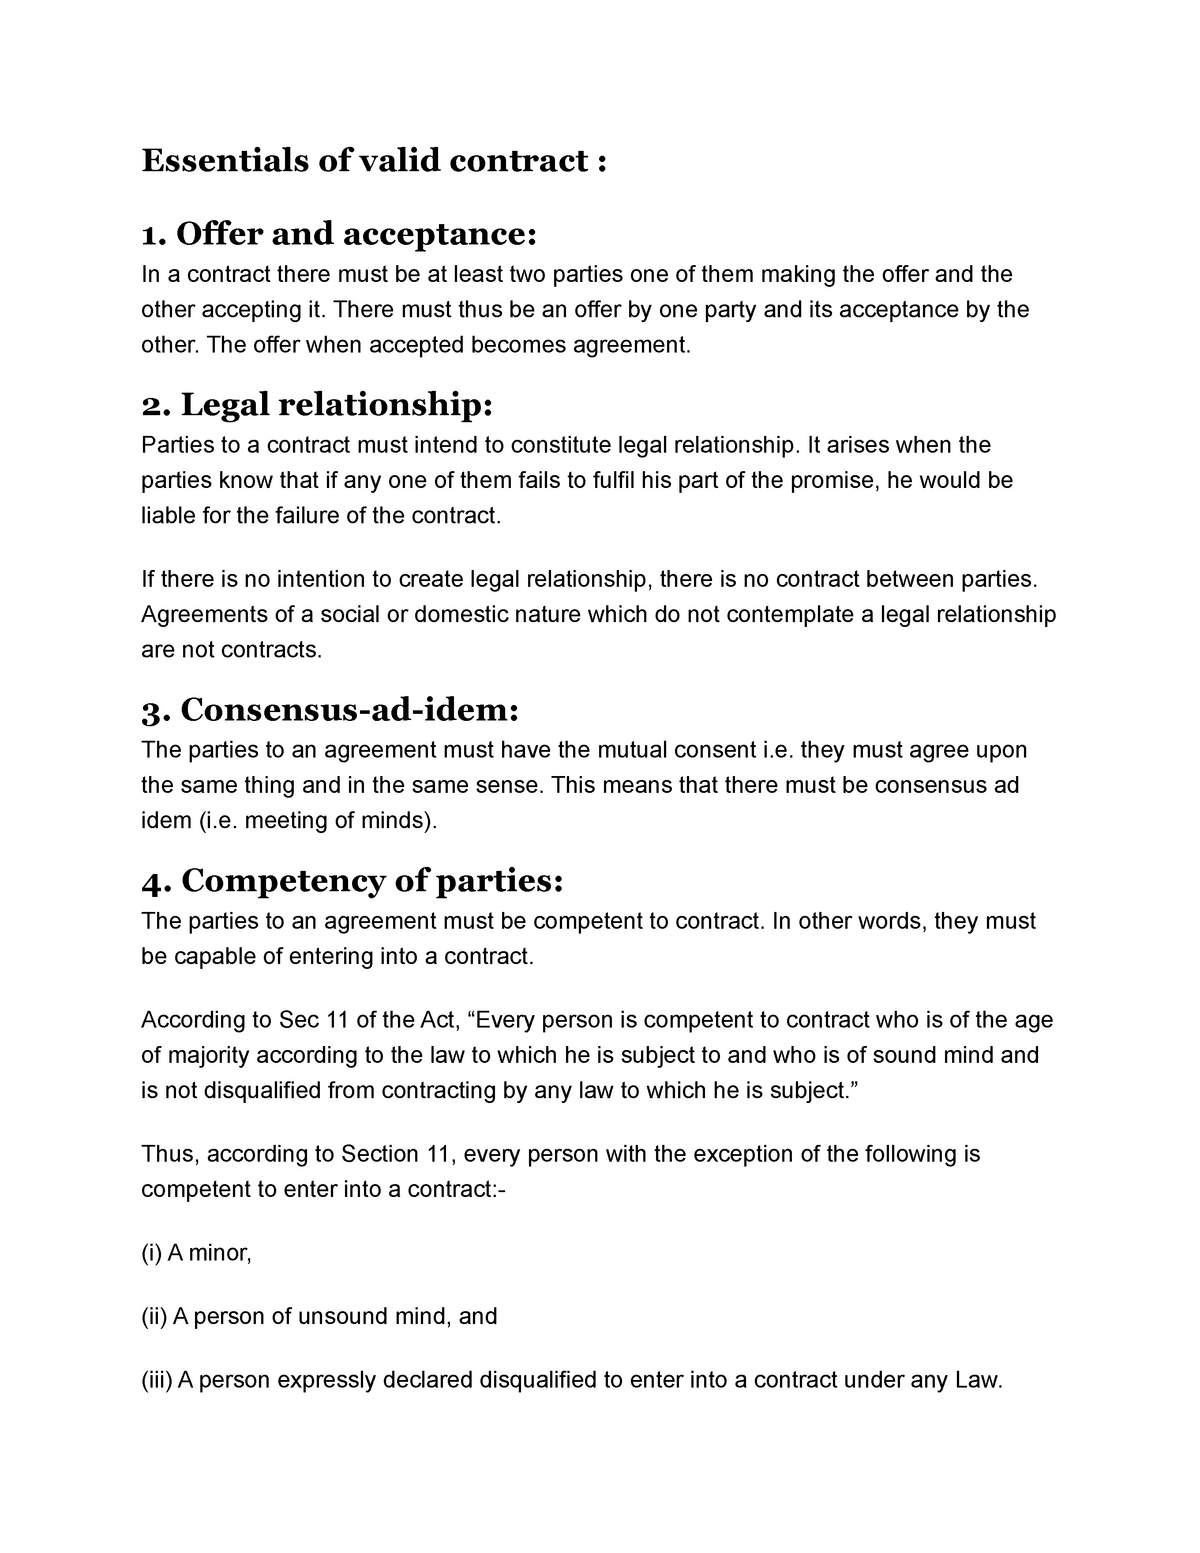 requirements of valid contract essay